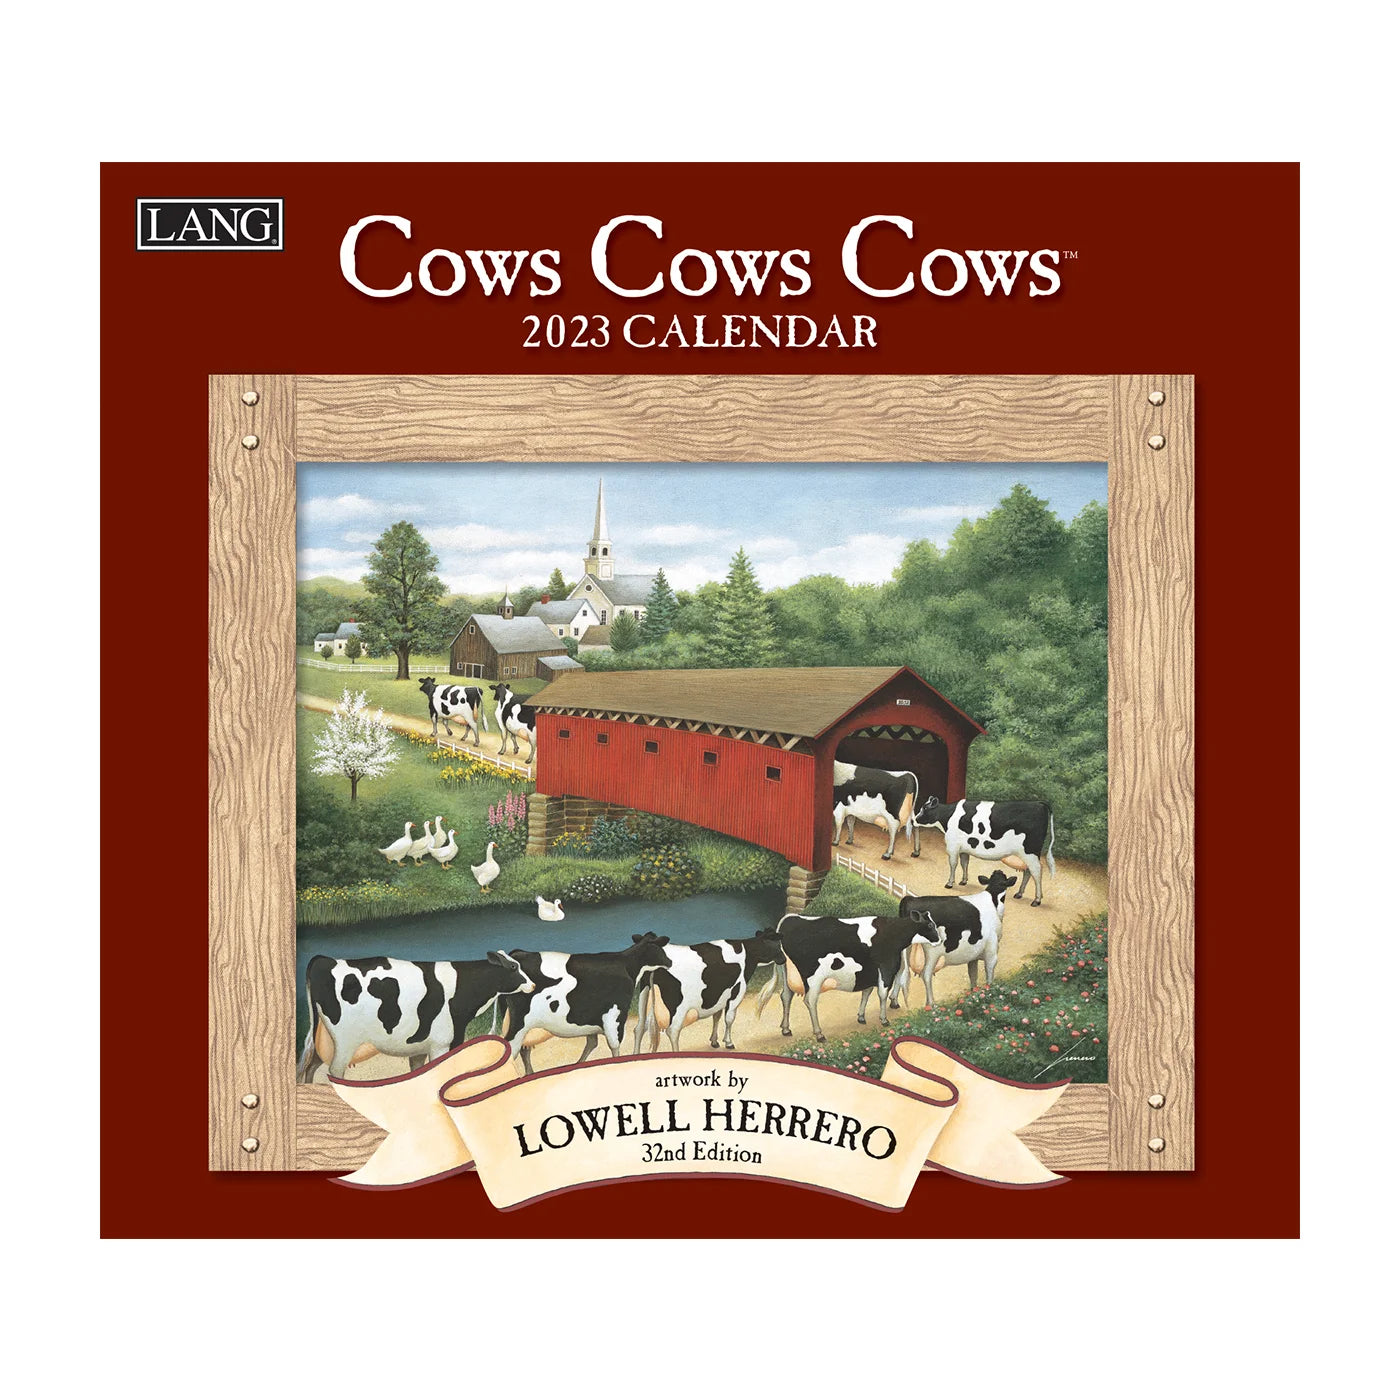 2023 LANG Cows Cows Cows by Lowell Herrero - Deluxe Wall Calendar